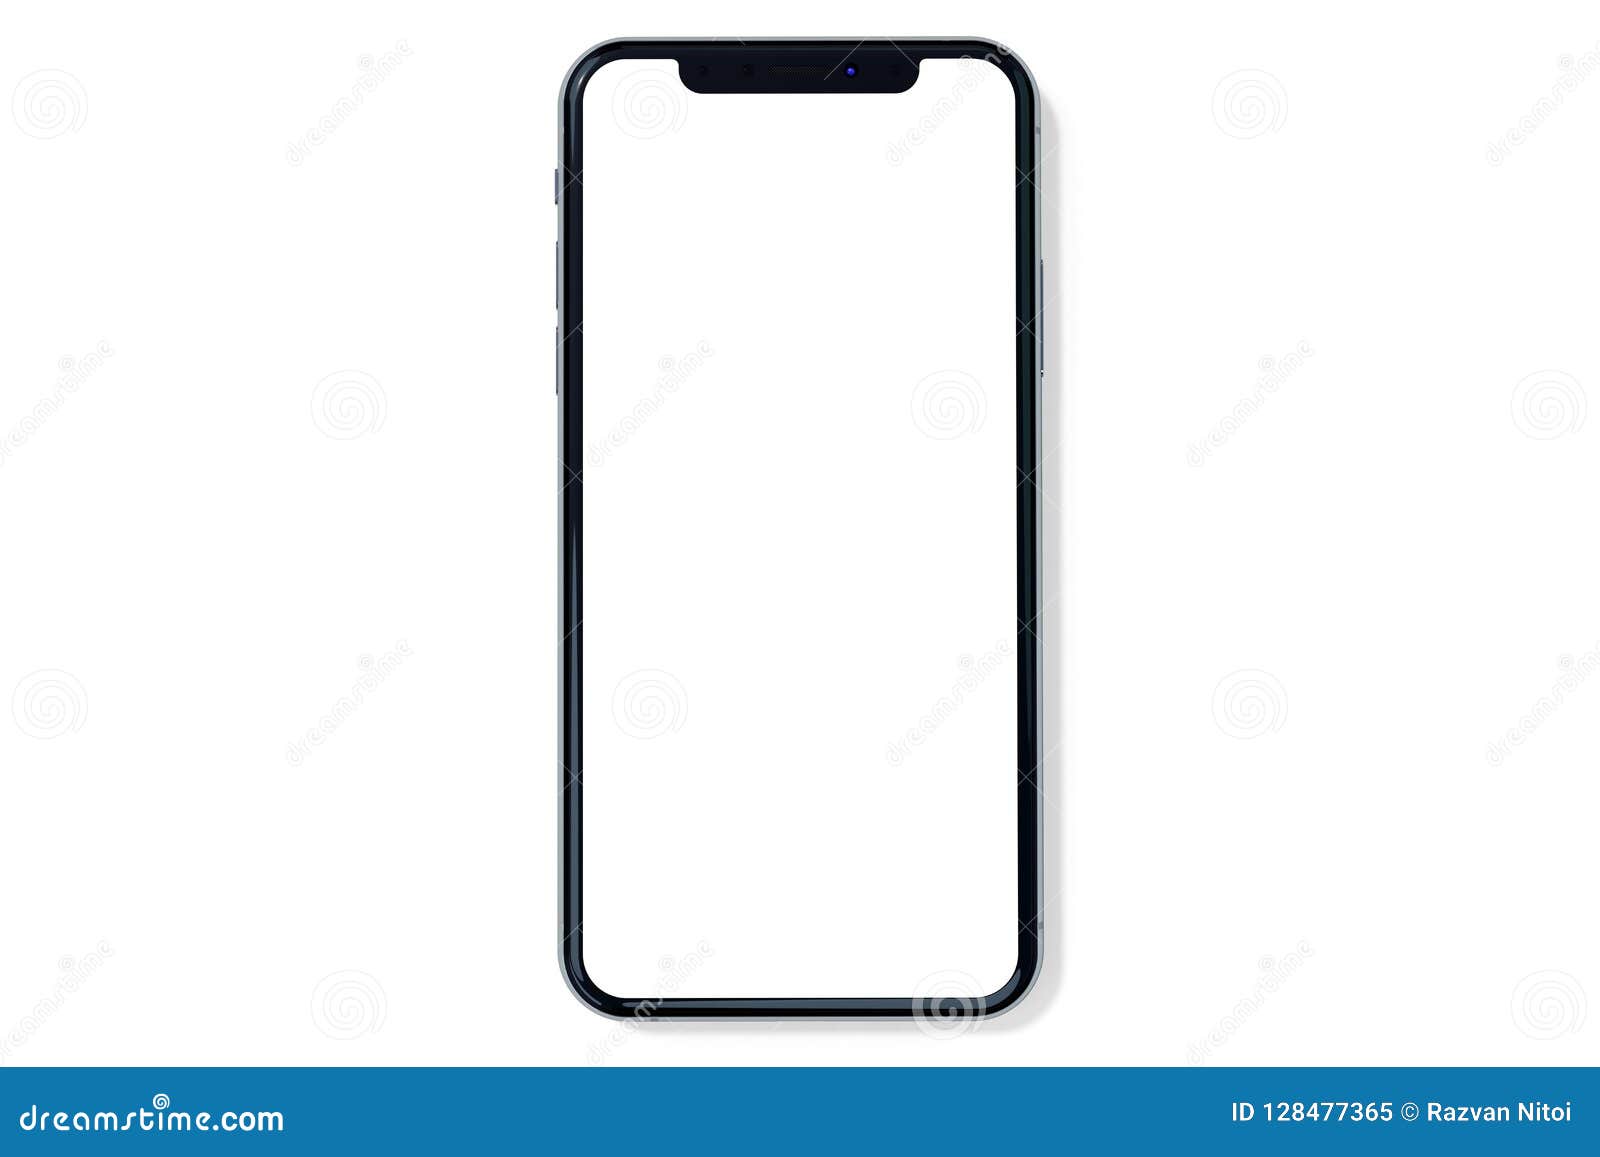 iphone xs silver mock-up front view on white